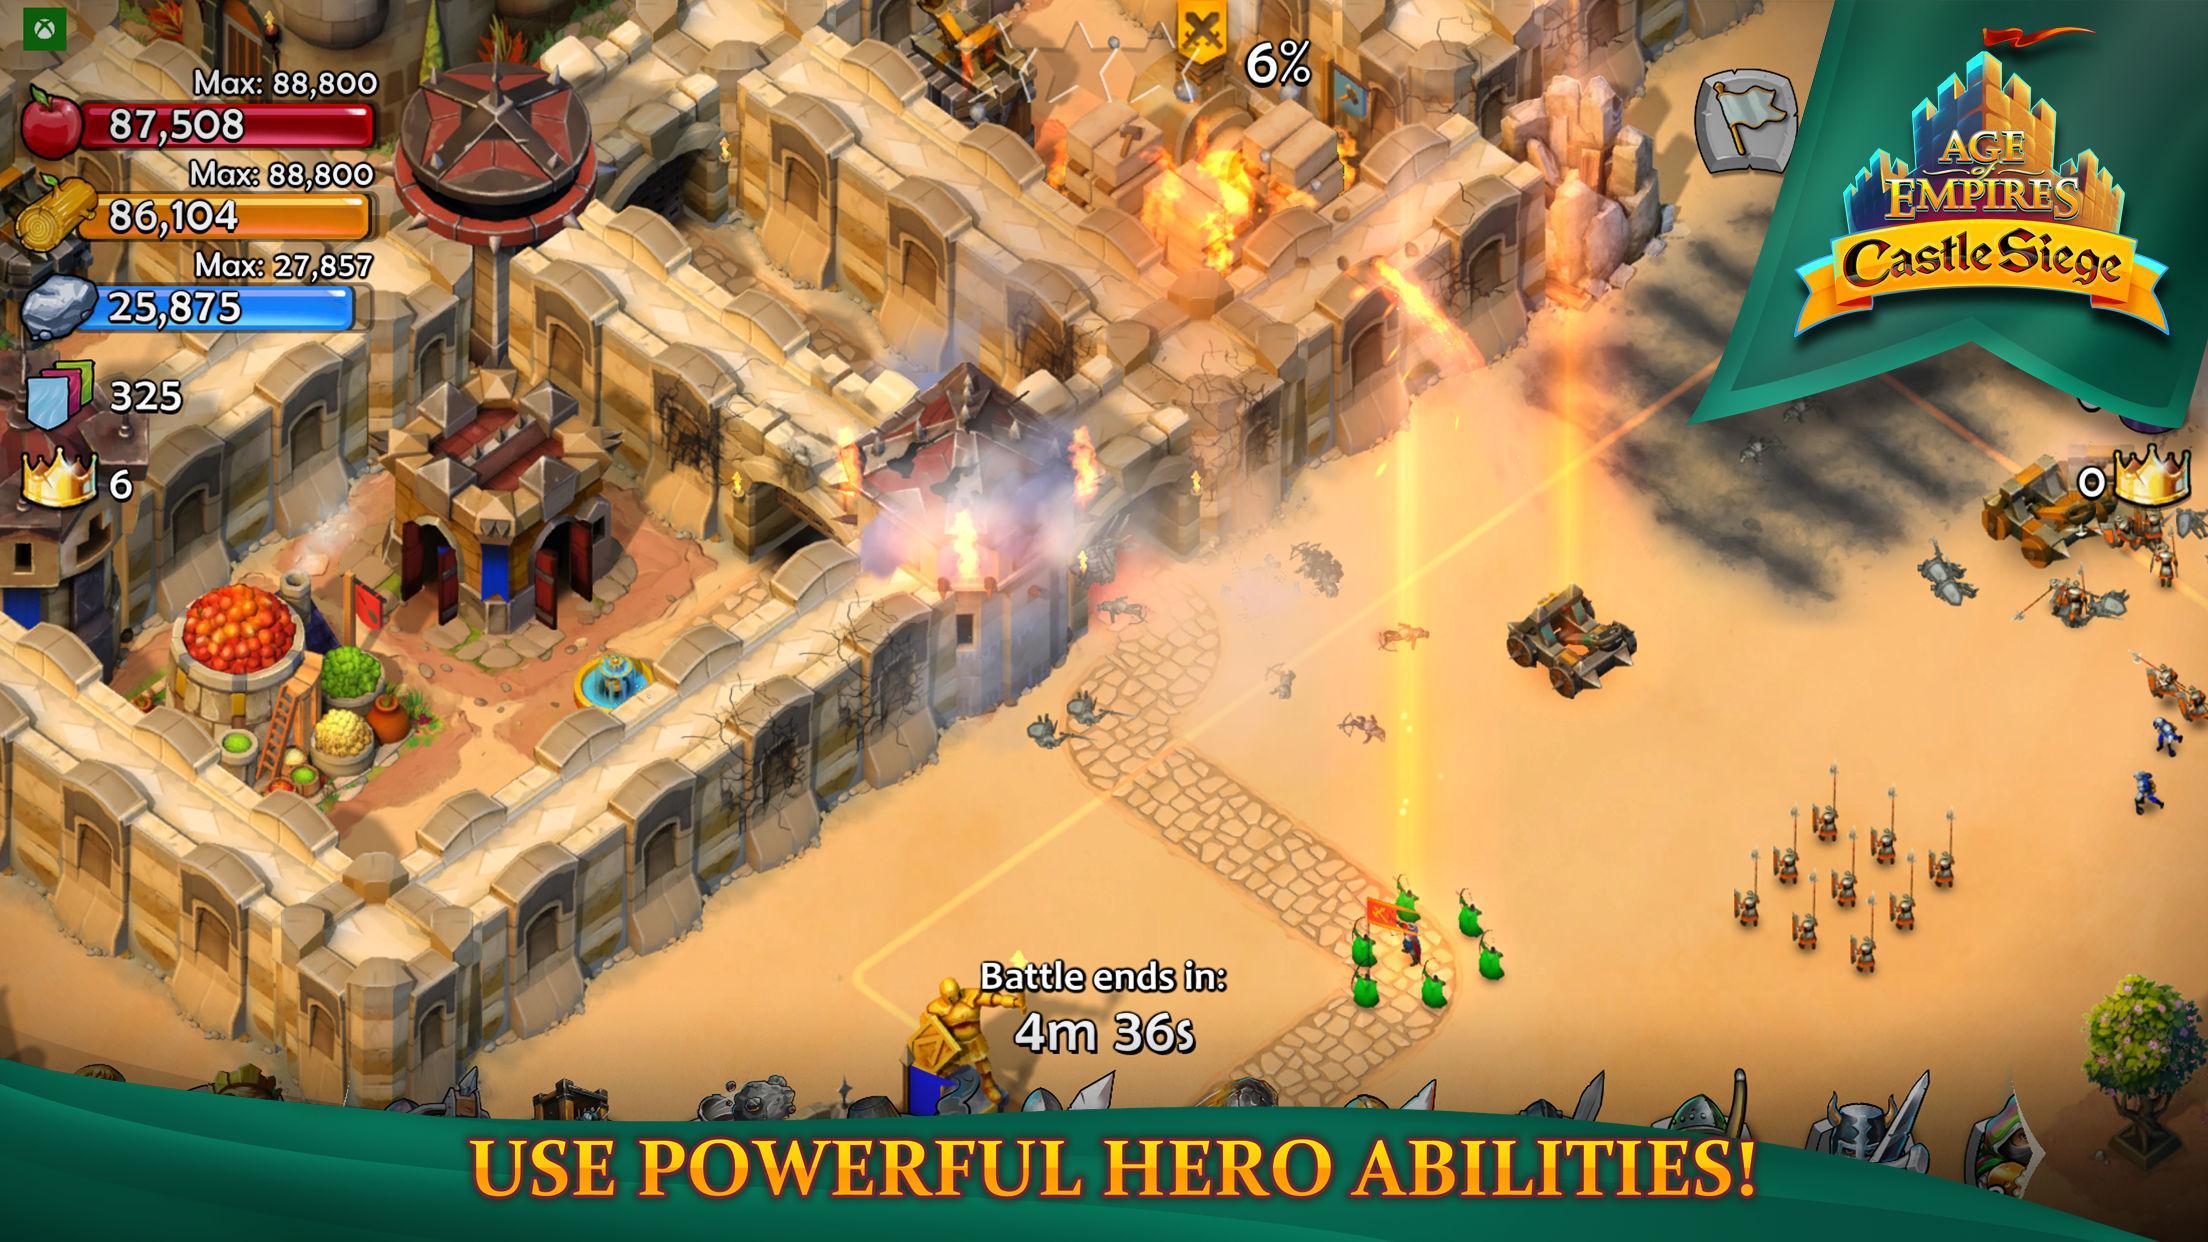 Age of Empires: Castle Siege screenshot game